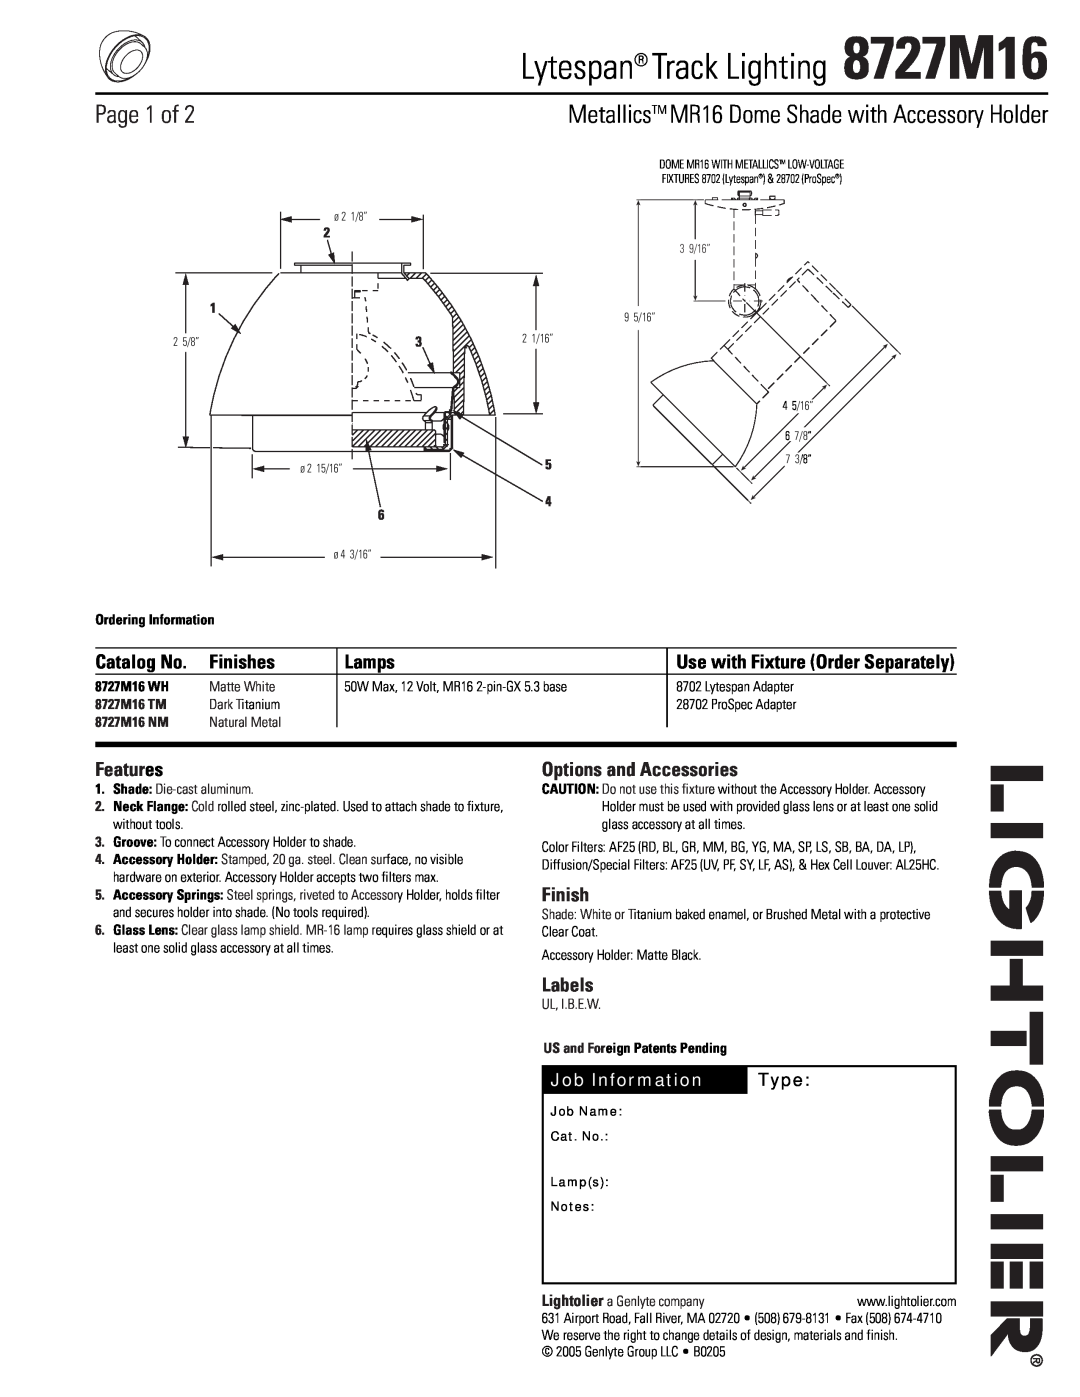 Lightolier manual Lytespan Track Lighting 8727M16, Page 1 of, MetallicsTM MR16 Dome Shade with Accessory Holder, Lamps 